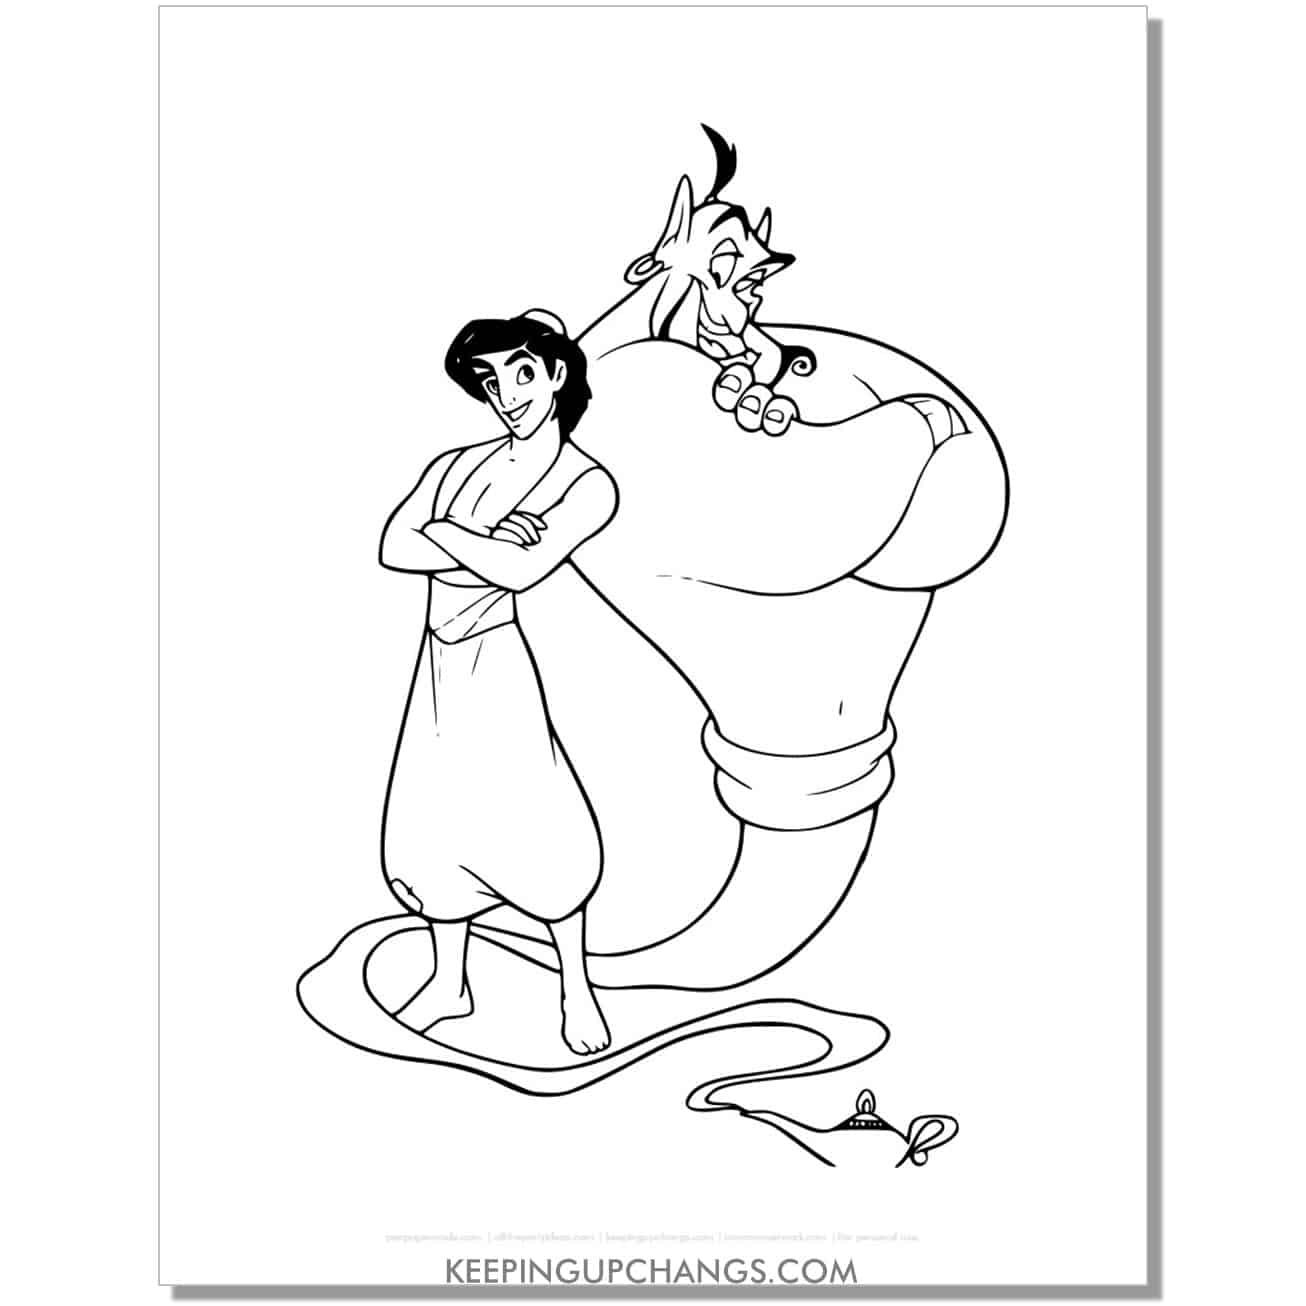 aladdin genie with backs together coloring page, sheet.